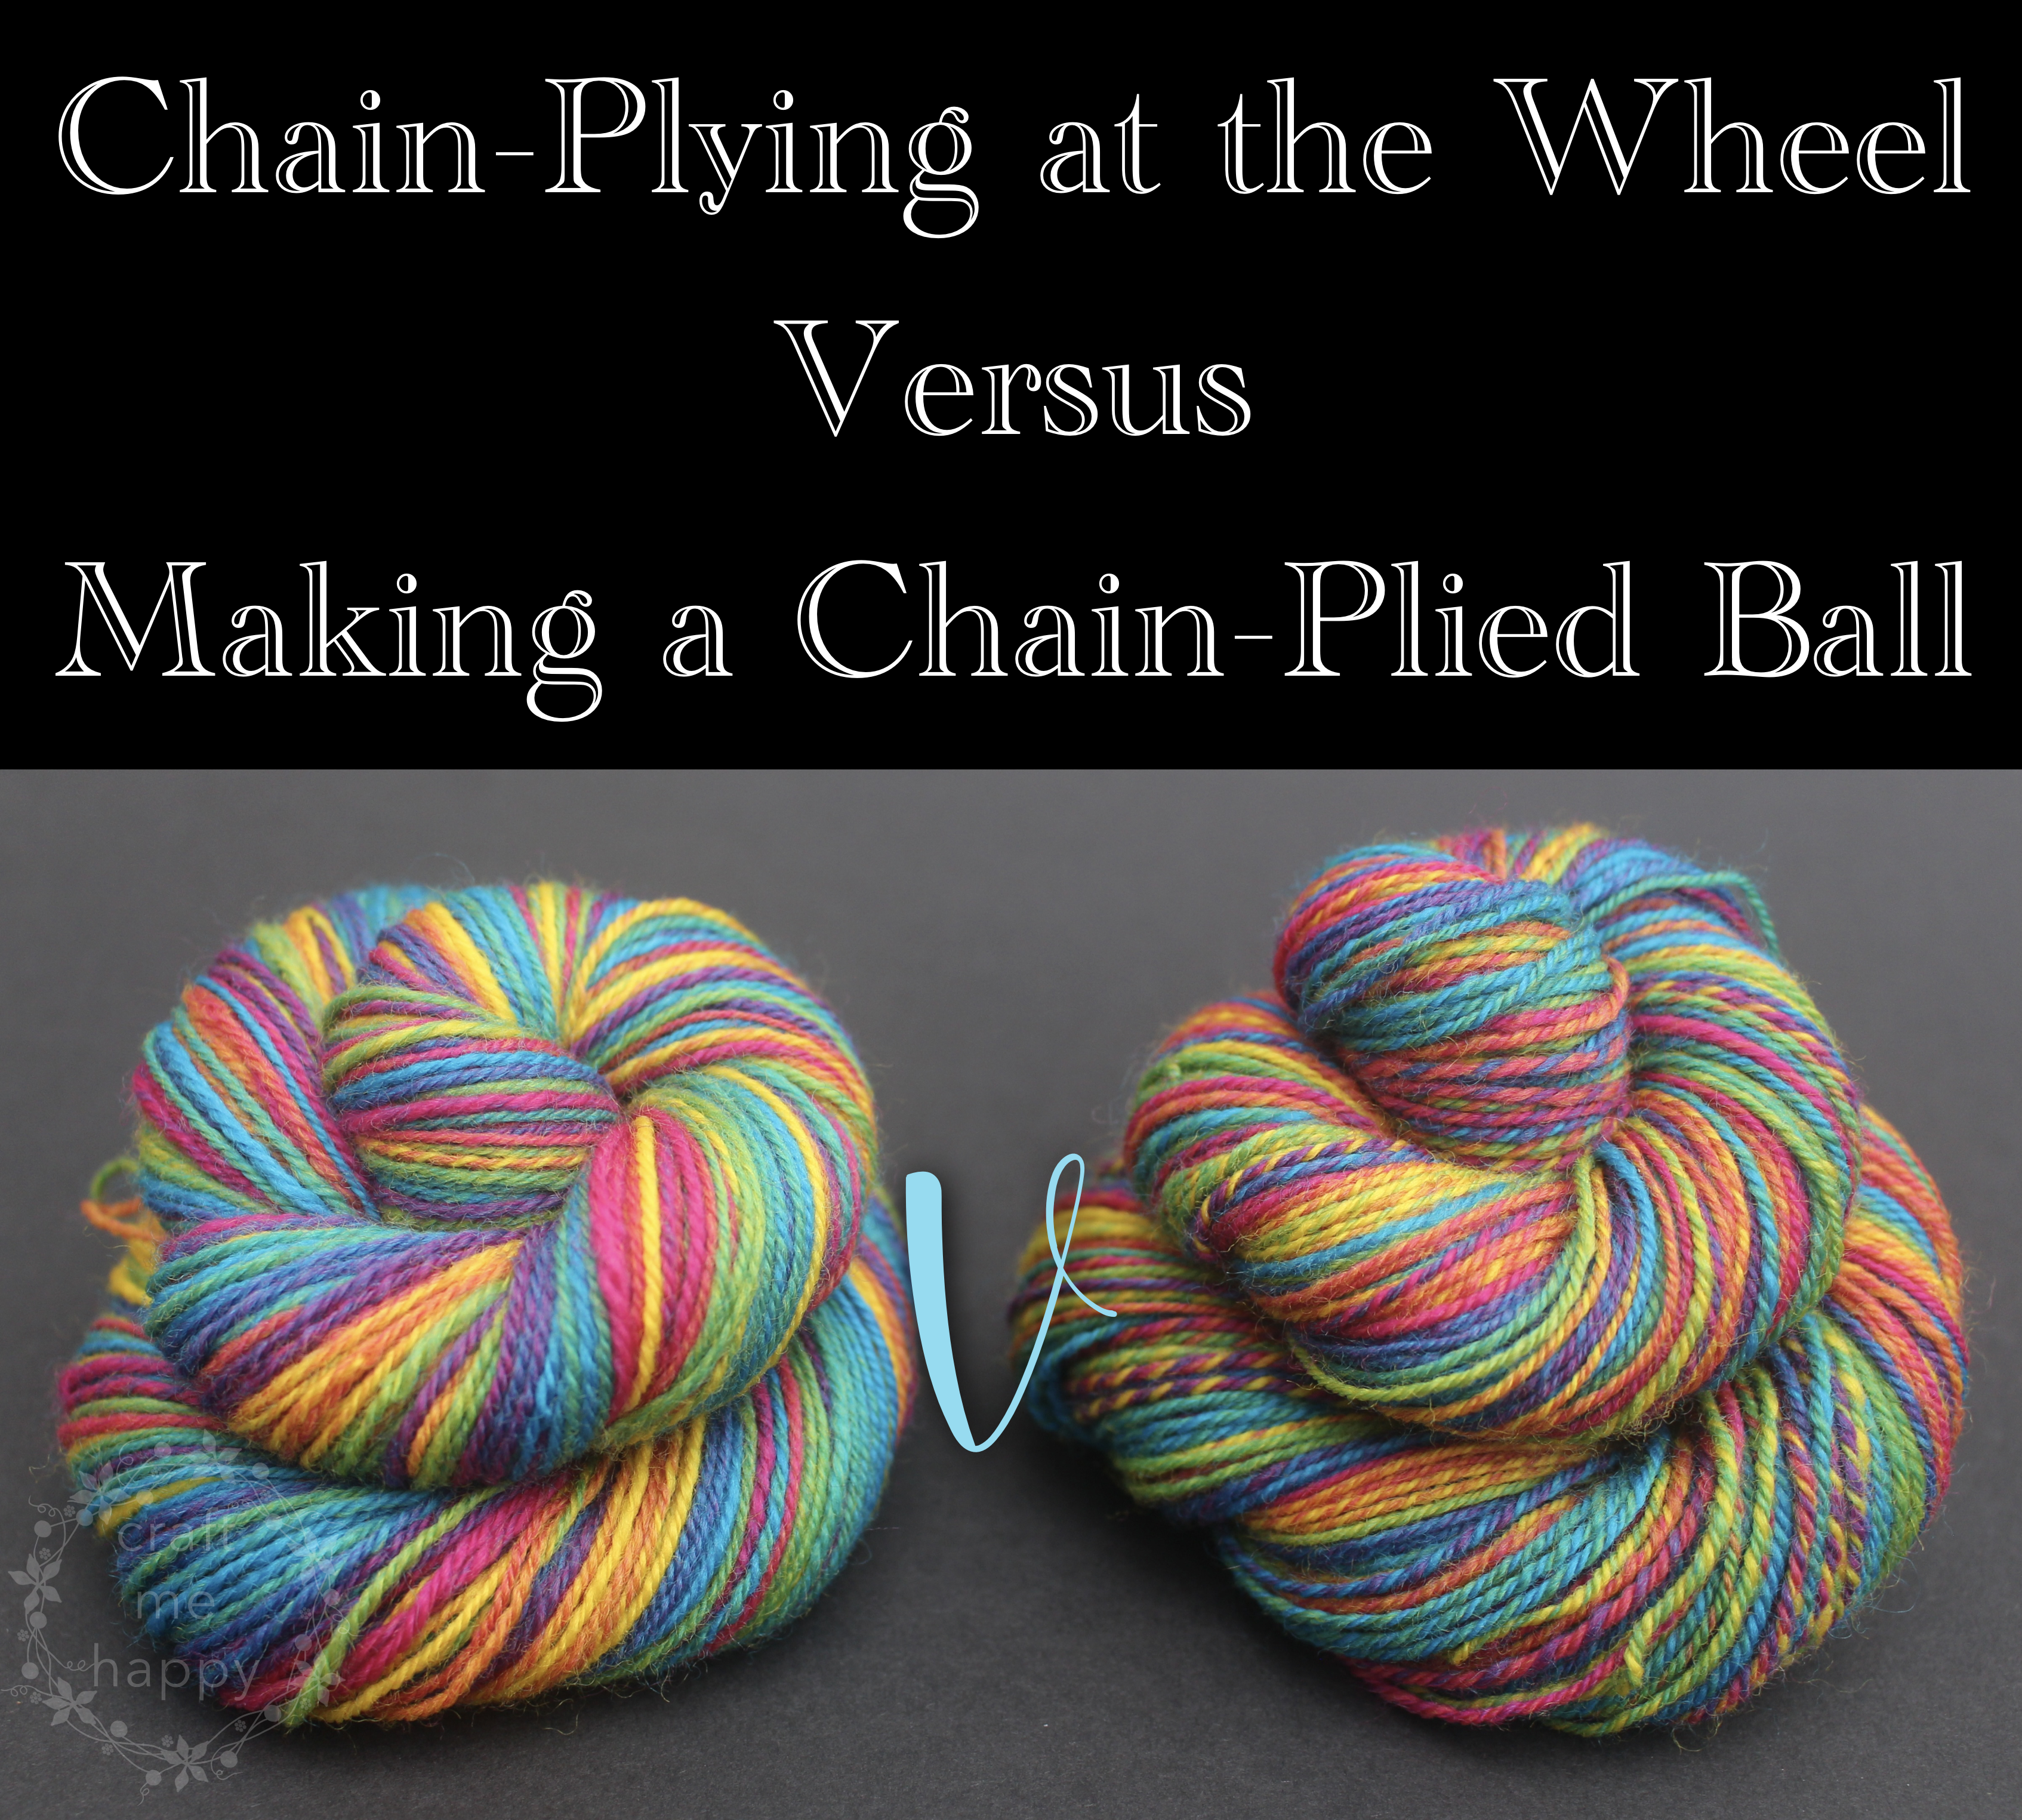 Craft me Happy!: Chain Plying at the Wheel - Versus - Making a